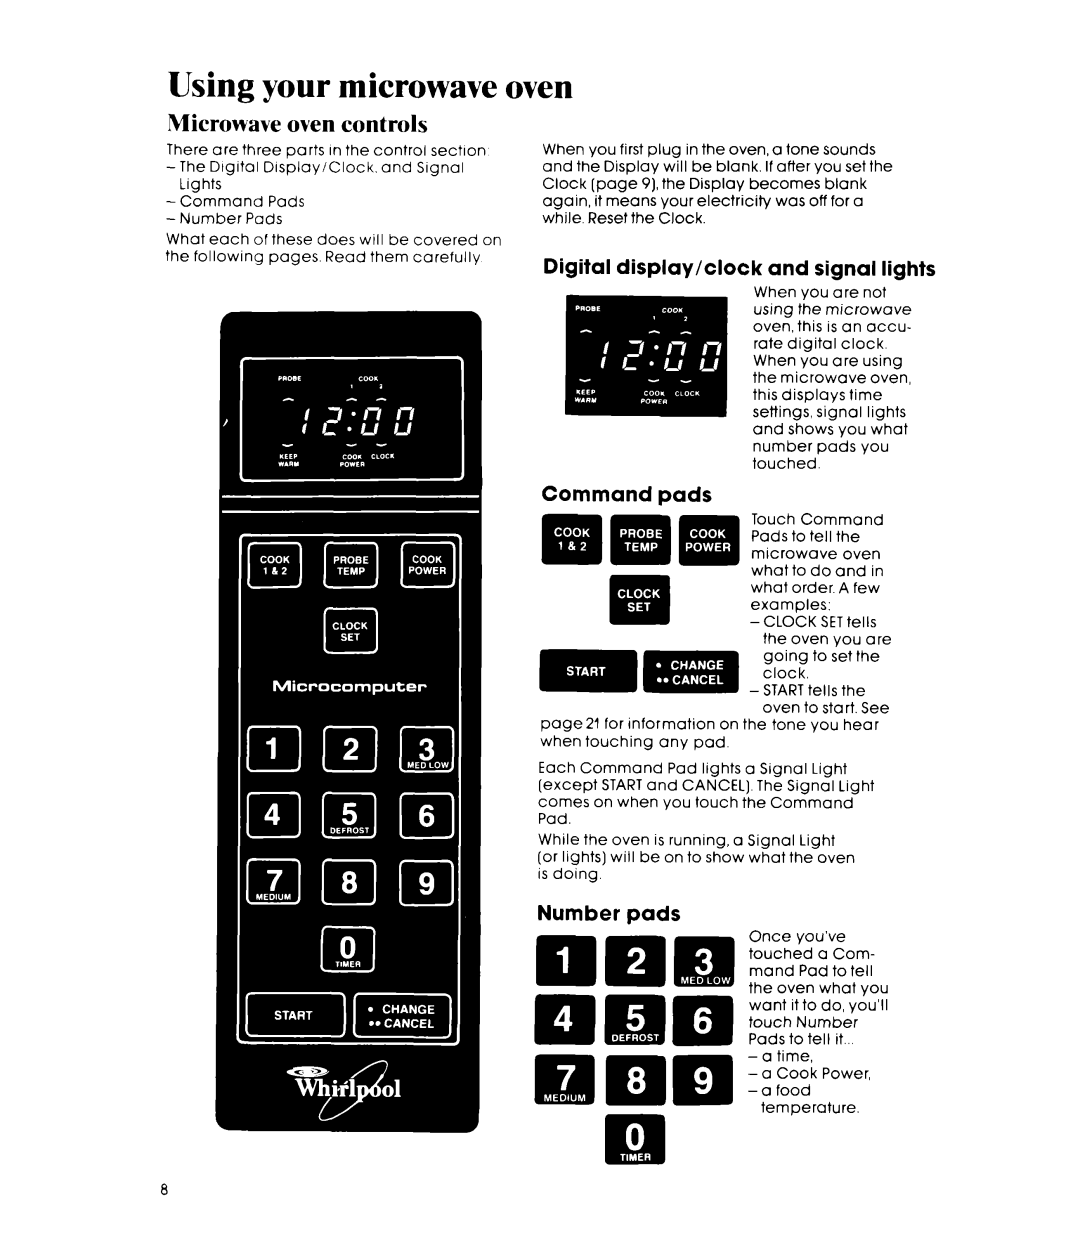 Whirlpool MW3500XM manual Using your microwave oven, Microwave oven controls, Digital display/clock and signal lights 